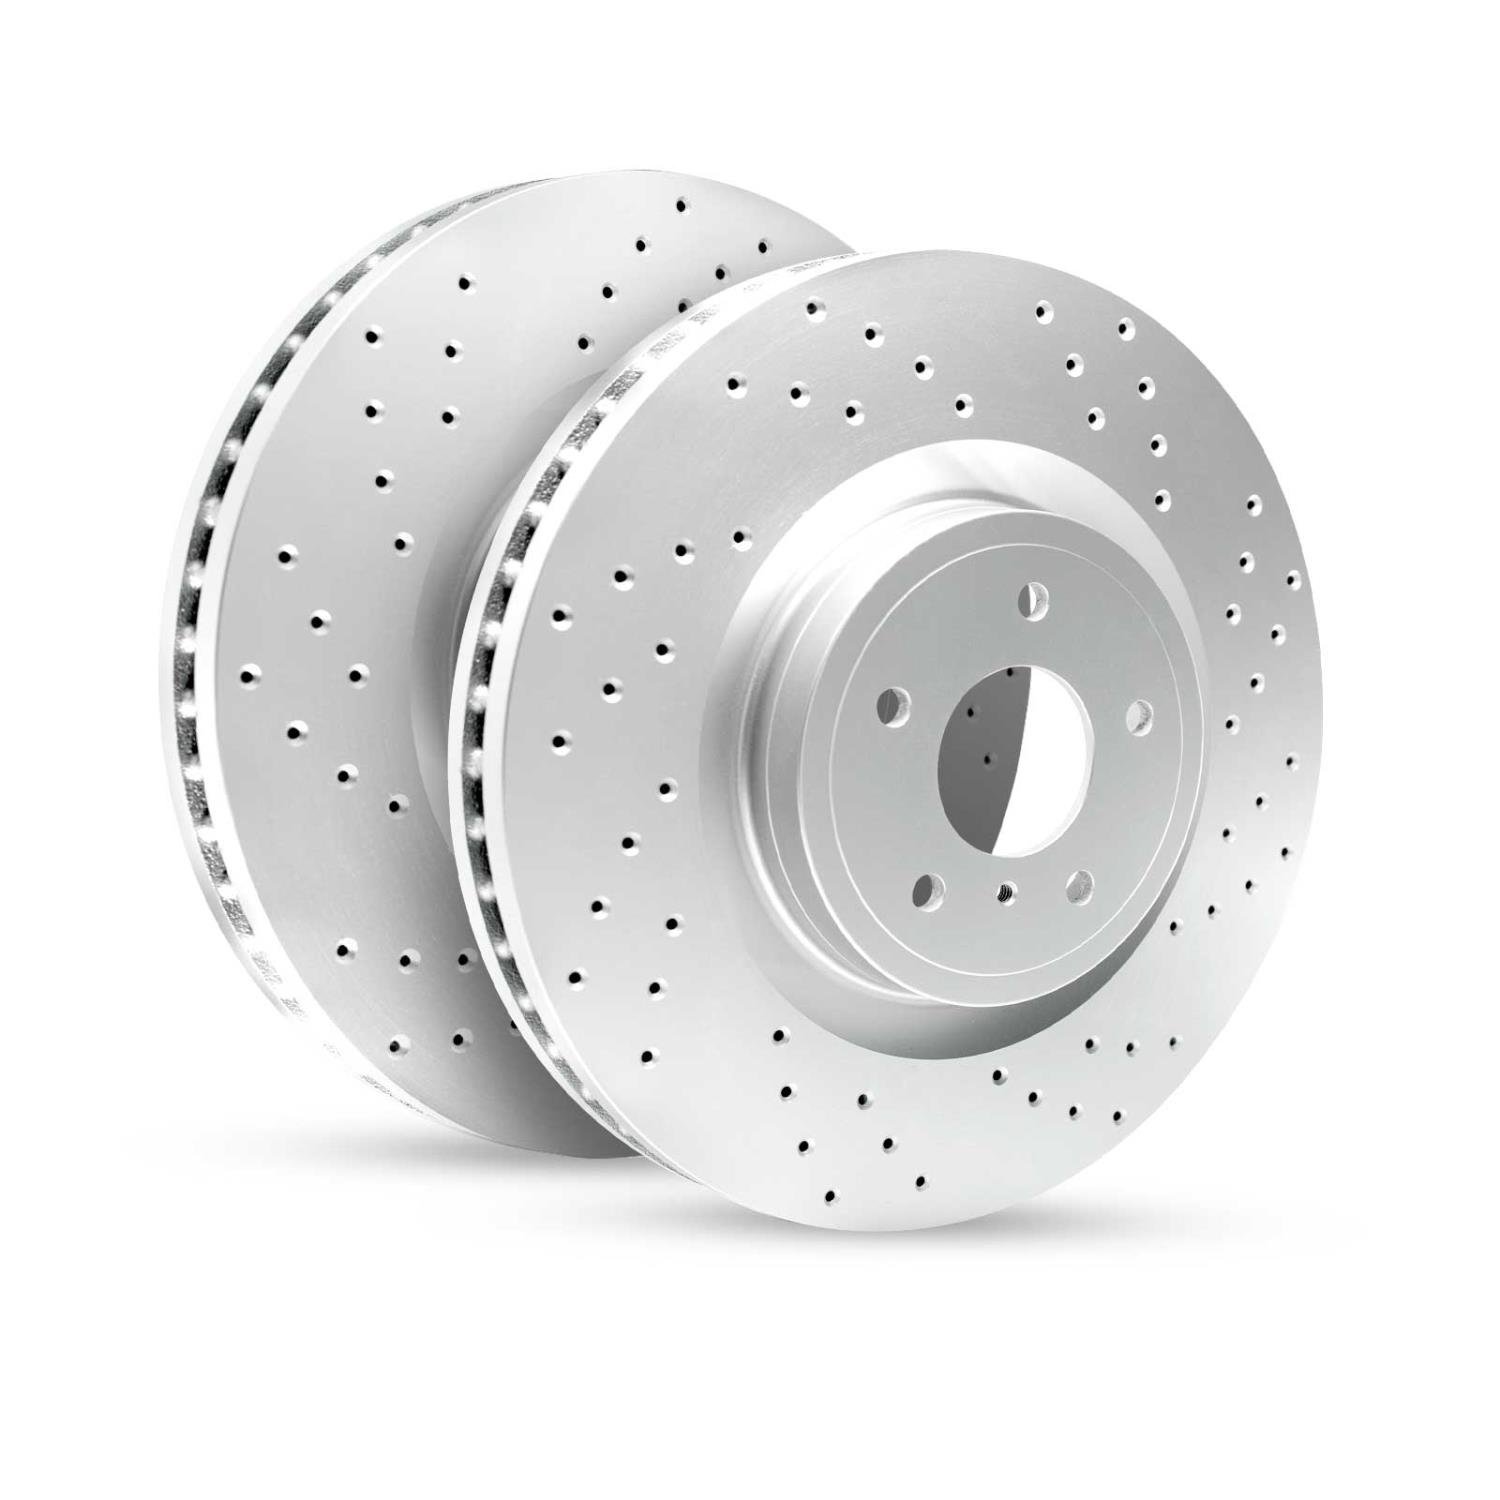 GEO-Carbon Drilled/Slotted Rotors, 1993-1995 Mercedes-Benz,